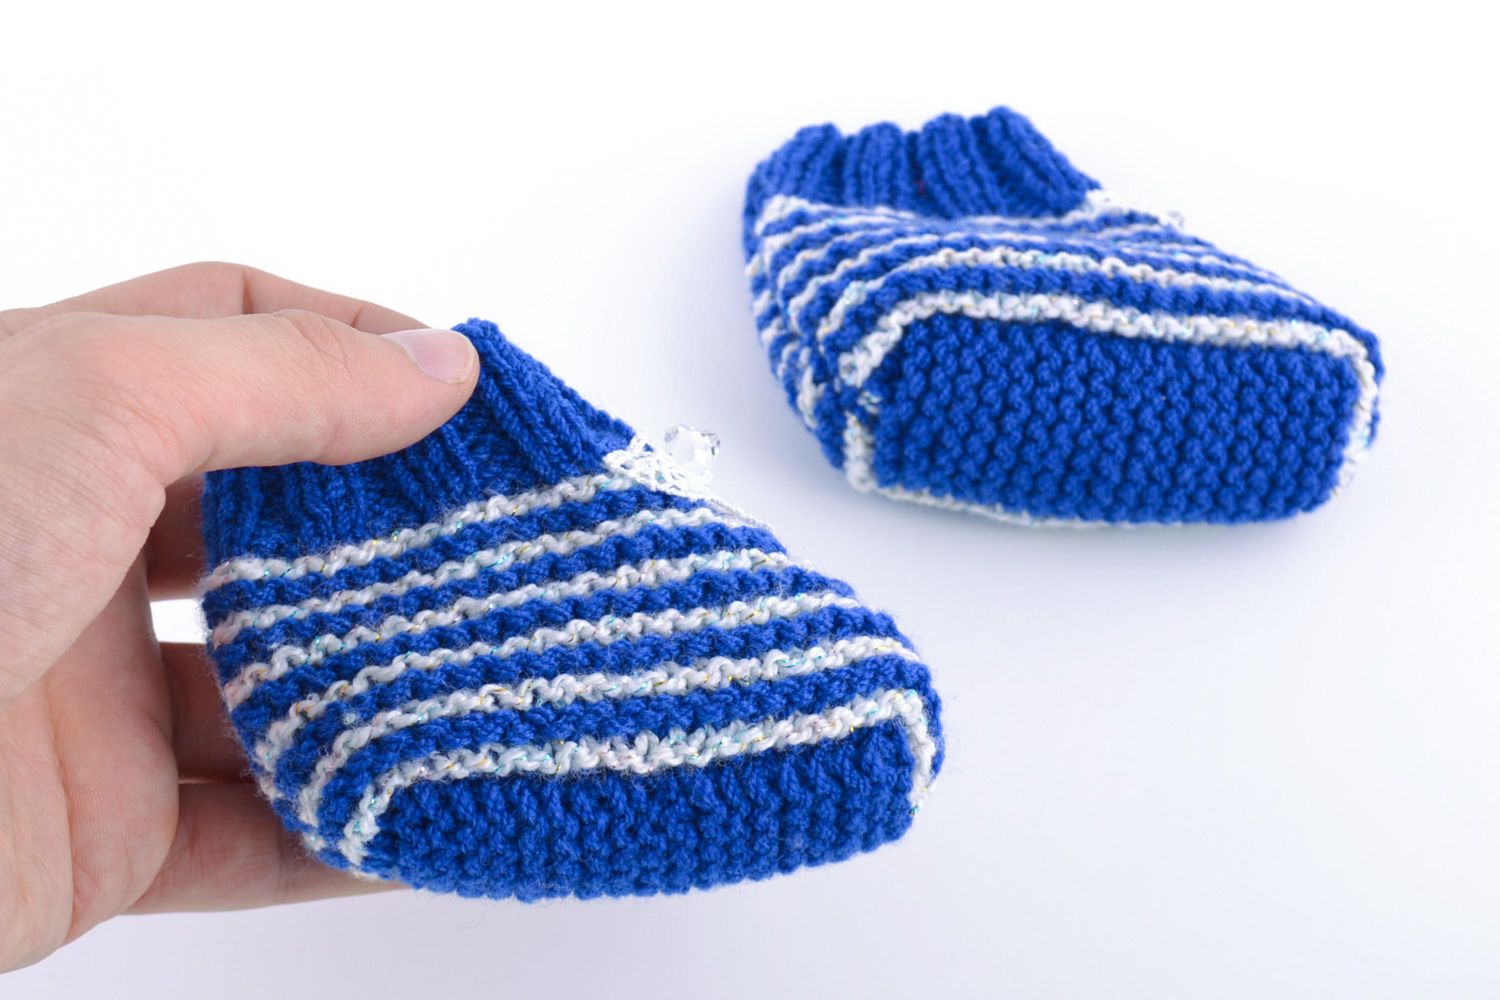 Handmade warm white and blue striped baby booties knitted of natural wool  photo 3